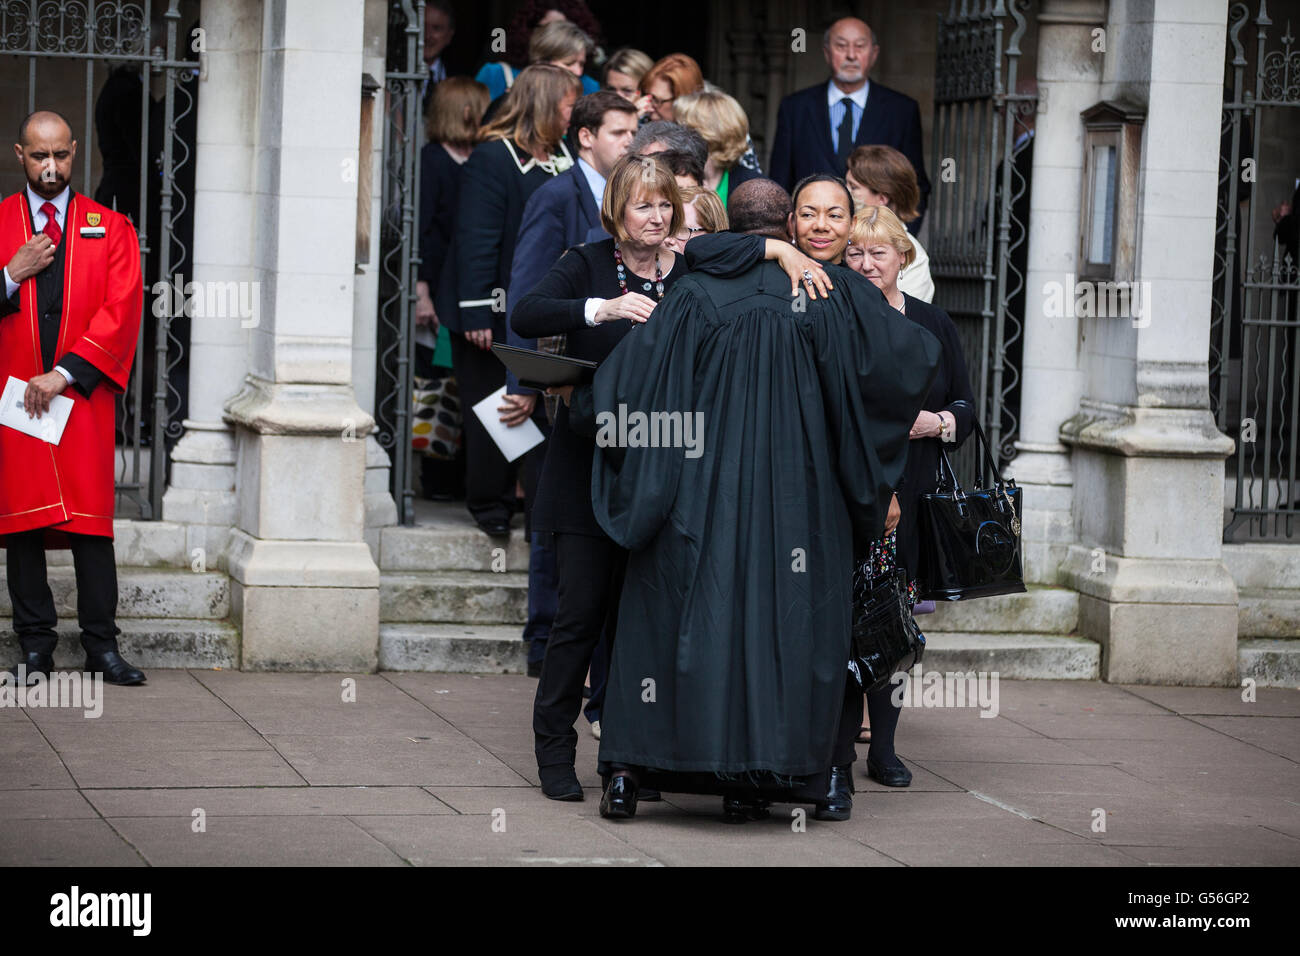 London, UK. 20th June, 2016. Harriet Harman MP and Baroness King of Bow leave St Margarets Church in Westminster, following a special service in memory of Jo Cox. Jo Cox was killed in her constituency of Batley and Spen on 16th June. Credit:  Mark Kerrison/Alamy Live News Stock Photo